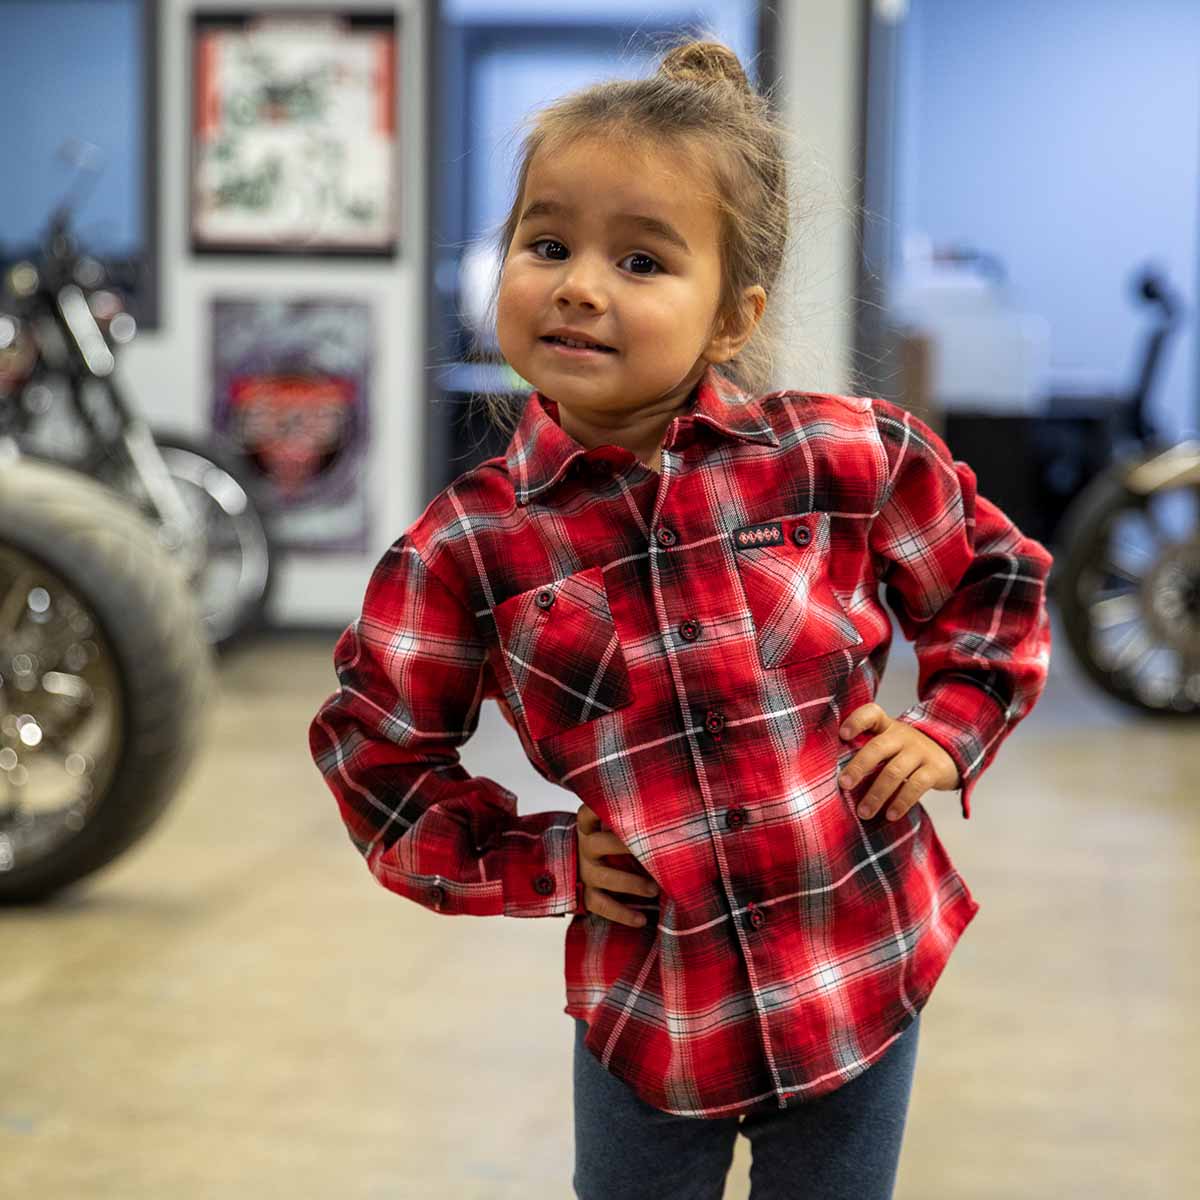 Klock Werks x Dixxon Tribute Flannel for Youth This little cutie is wearing an X-Small Klock Werks x Dixxon Tribute Flannel for Youth(This little cutie is wearing an X-Small Klock Werks x Dixxon Tribute Flannel for Youth)